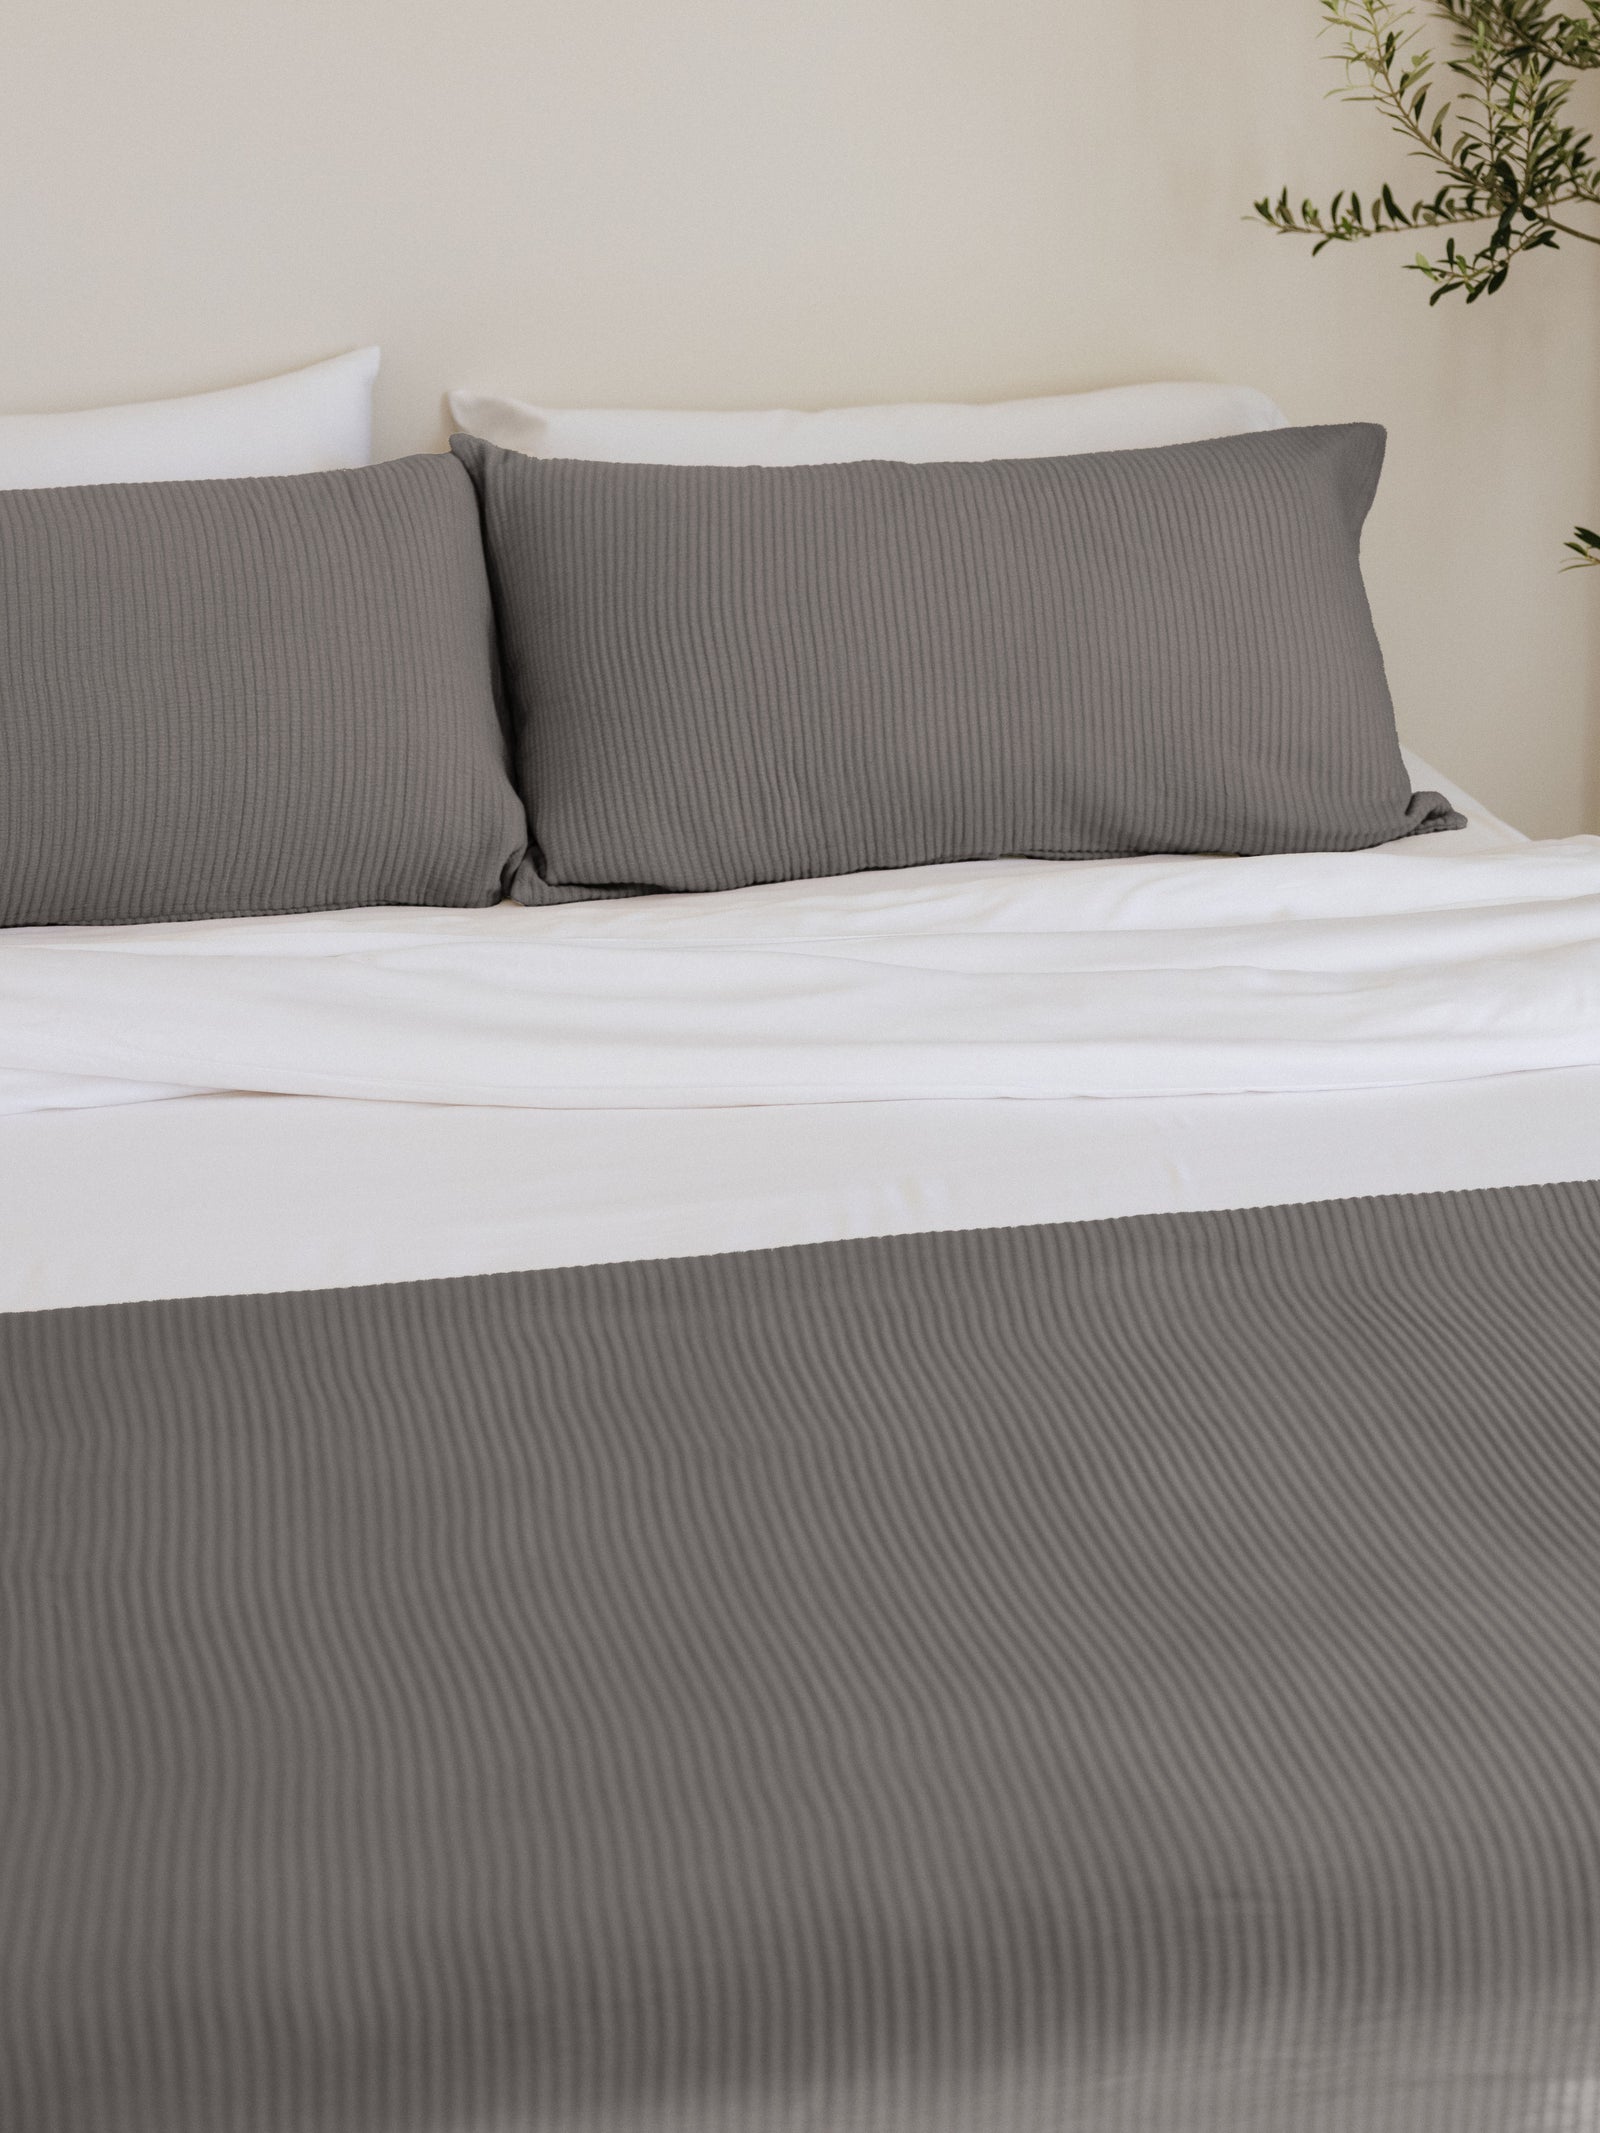 Charcoal shams and coverlet on a bed 